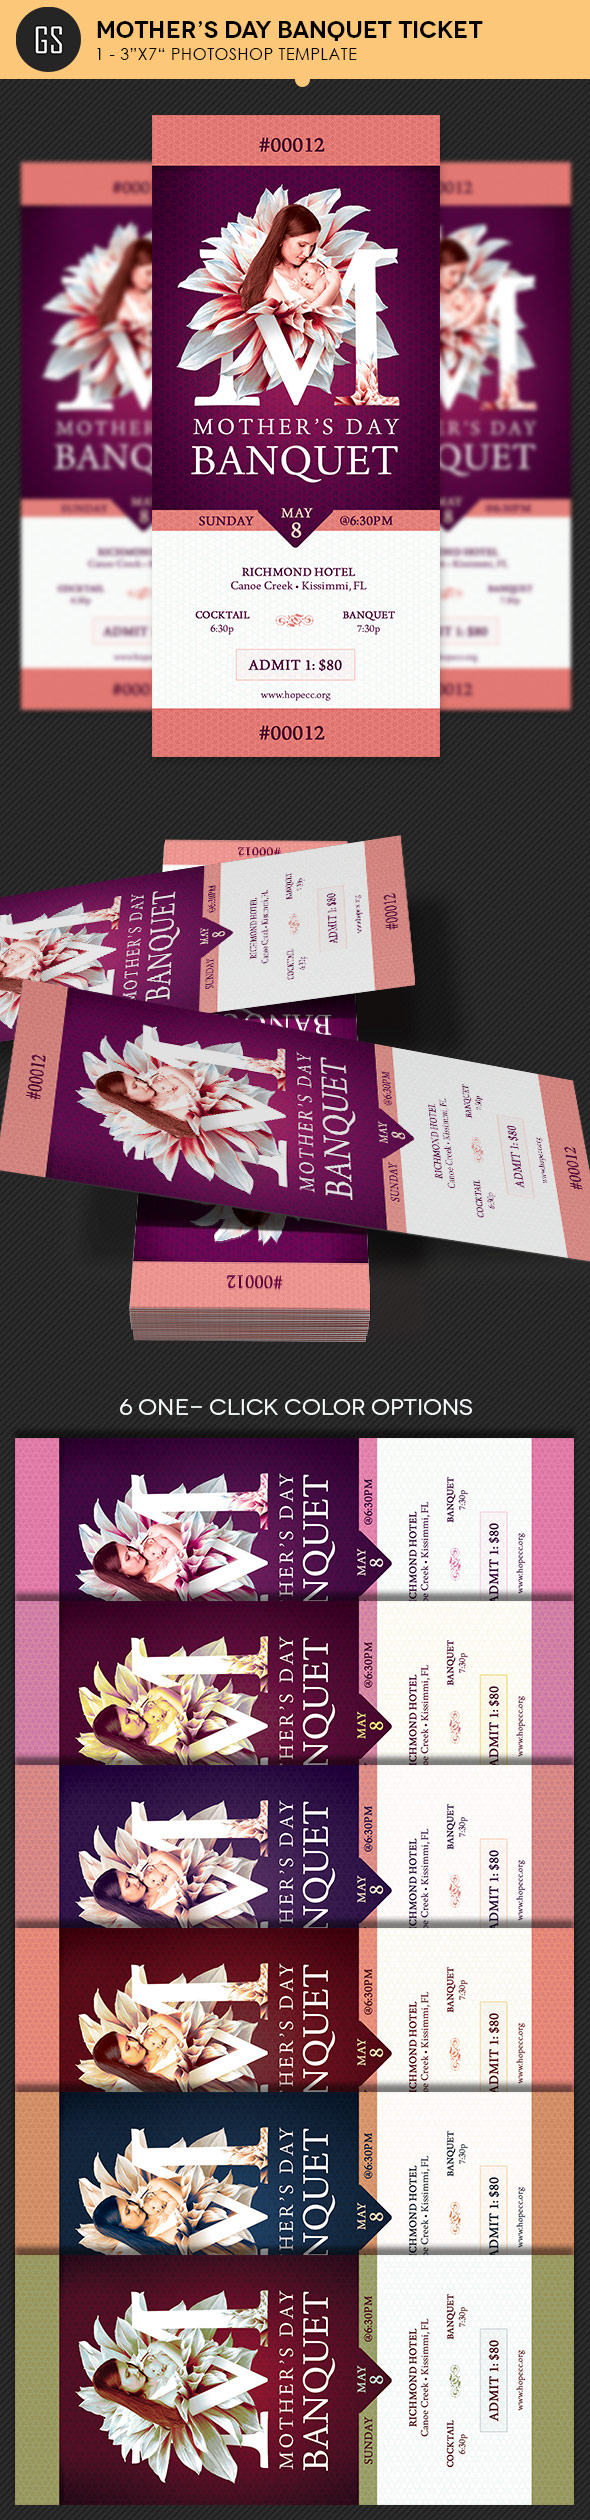 Mothers Day Banquet Ticket Photoshop Template 